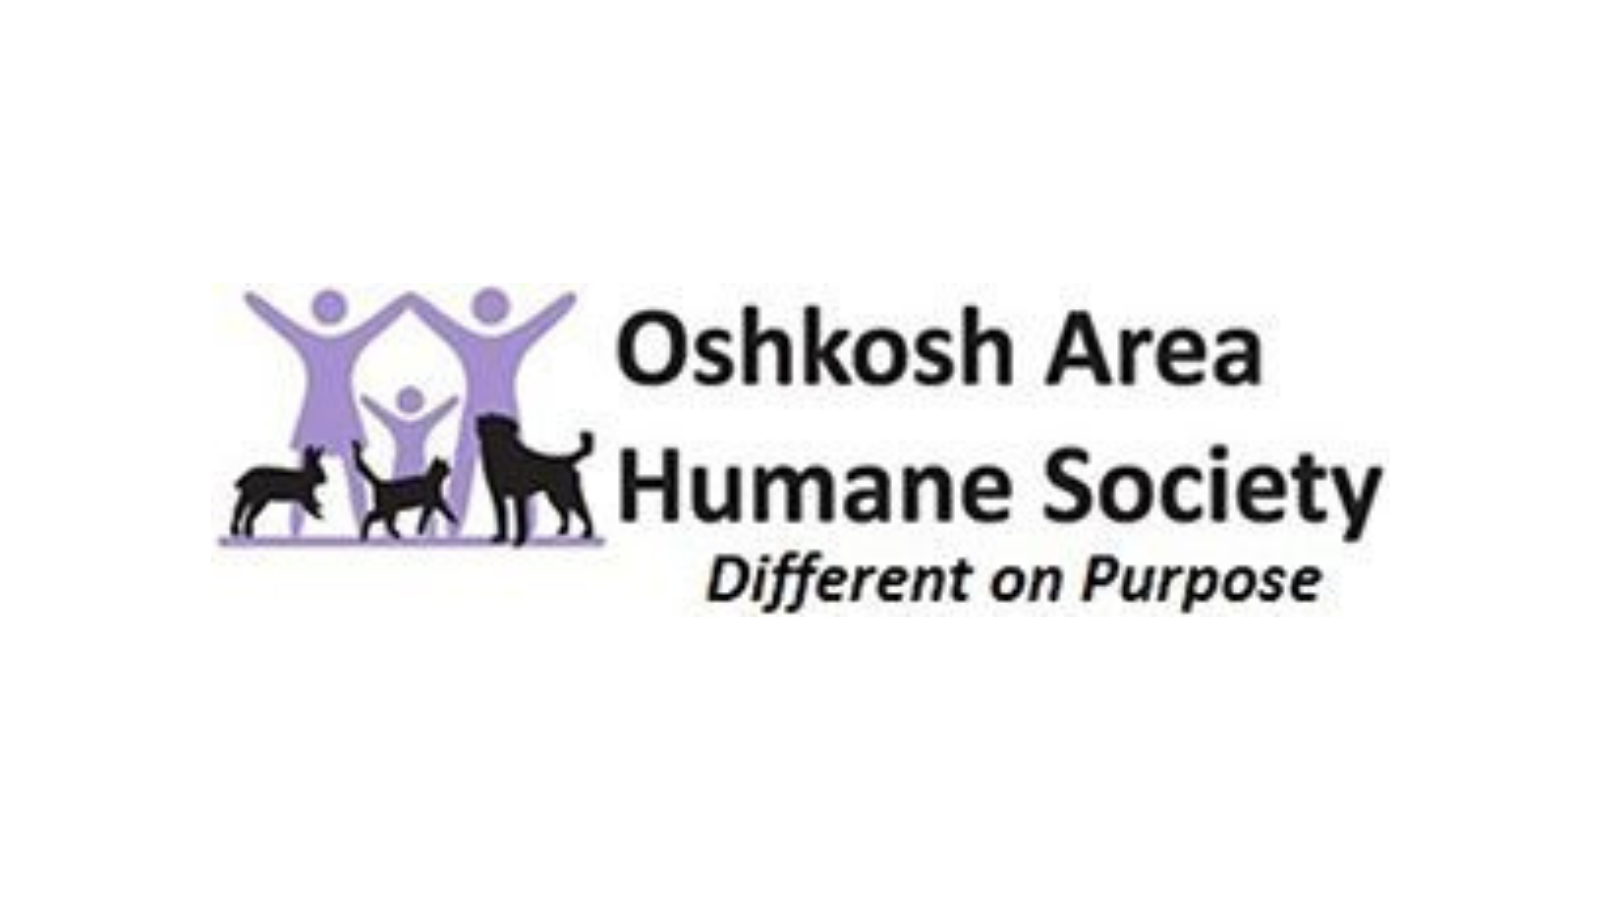 OAHS urgently seeks adopters to clear out the shelter